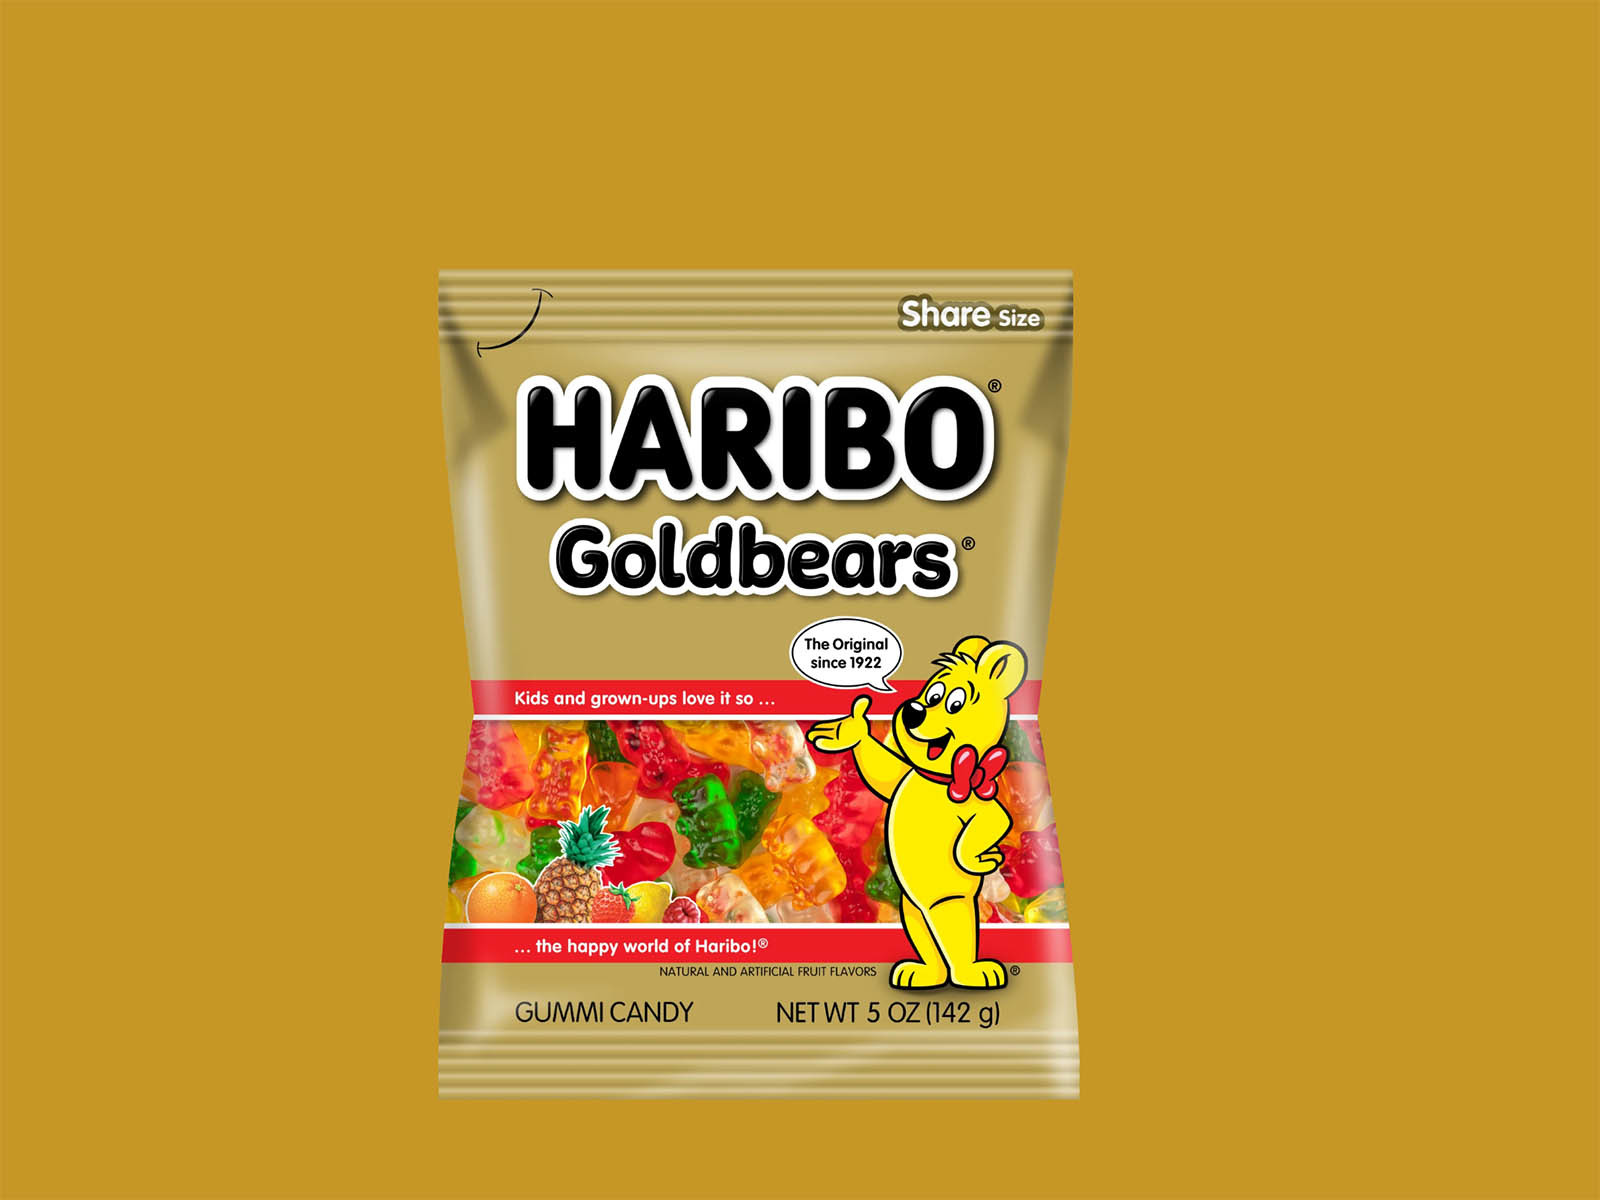 Wisconsin S About To Up Its Gummy Game Thanks To New Haribo Production Campus